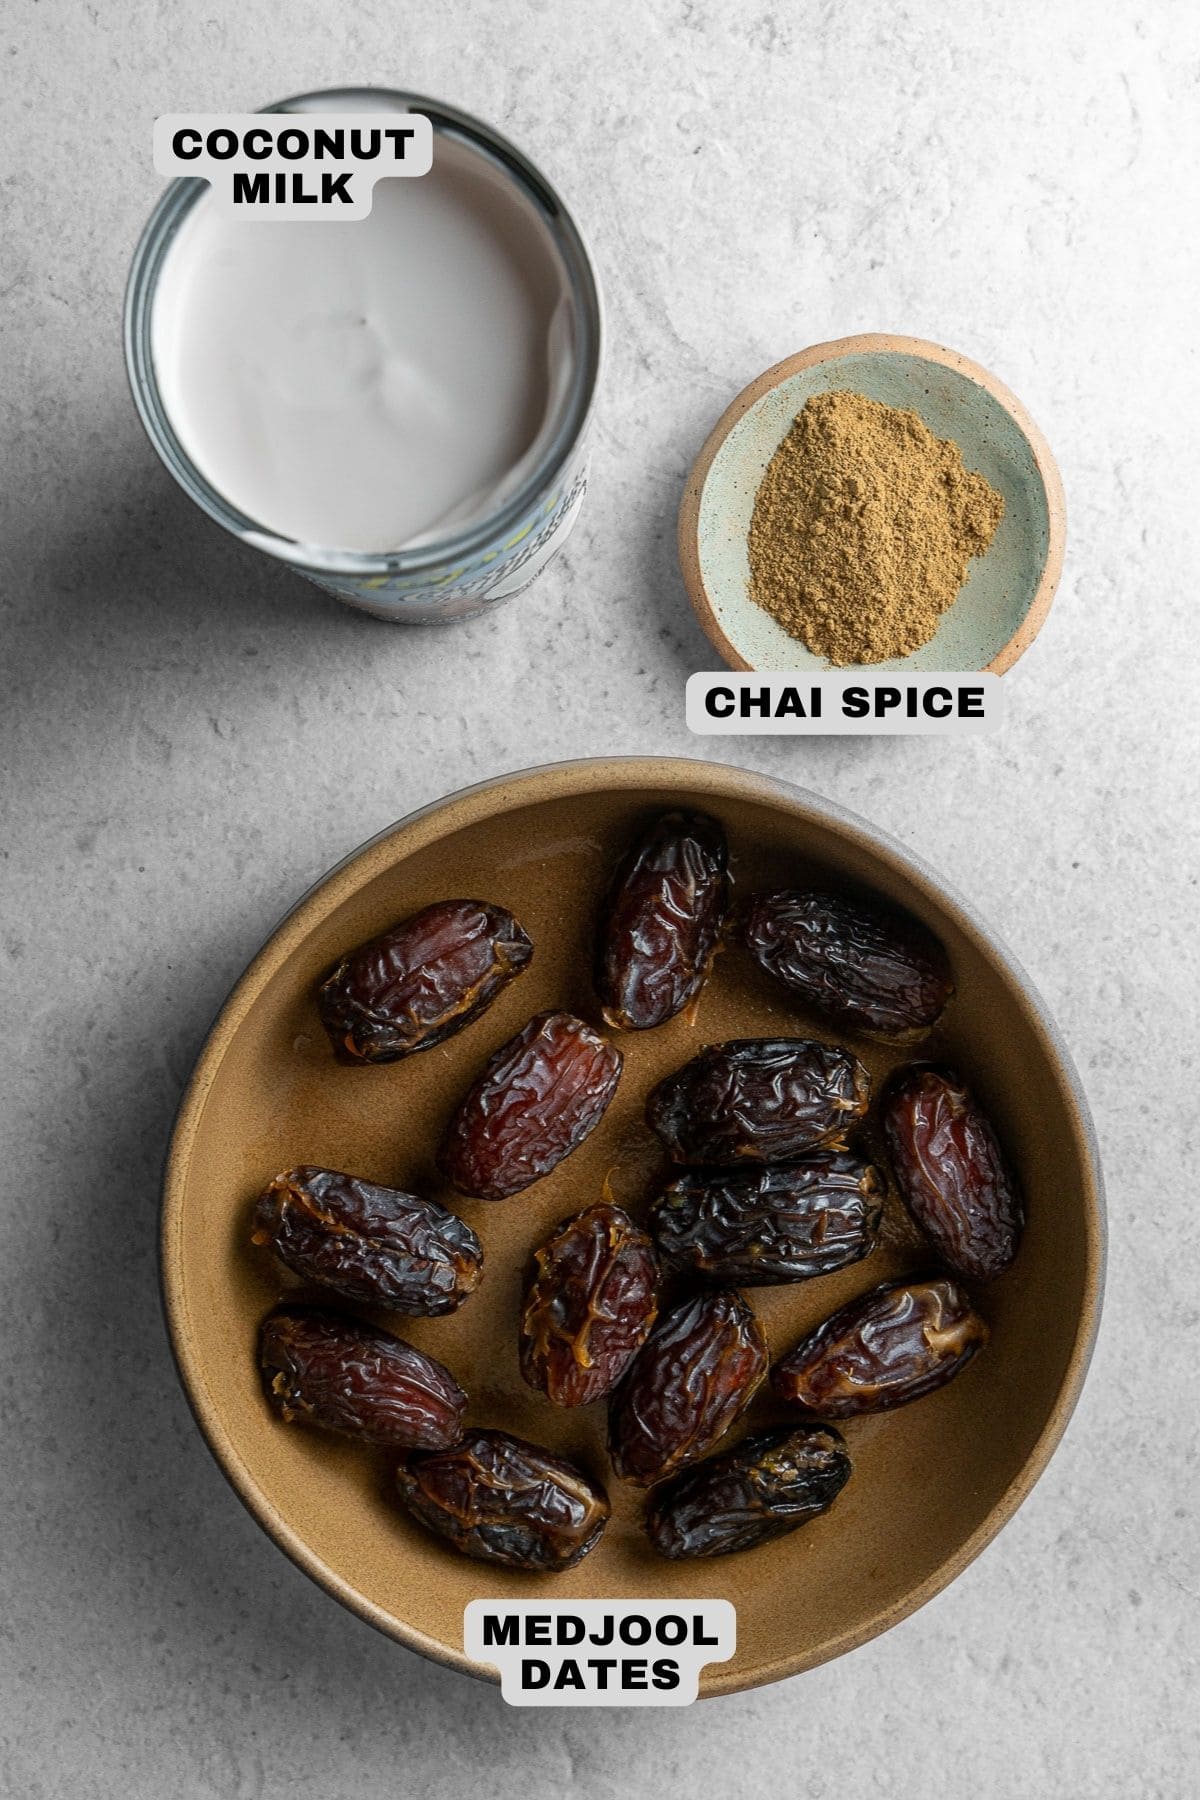 Coconut milk, chai spice, medjool dates ingredients with labels.